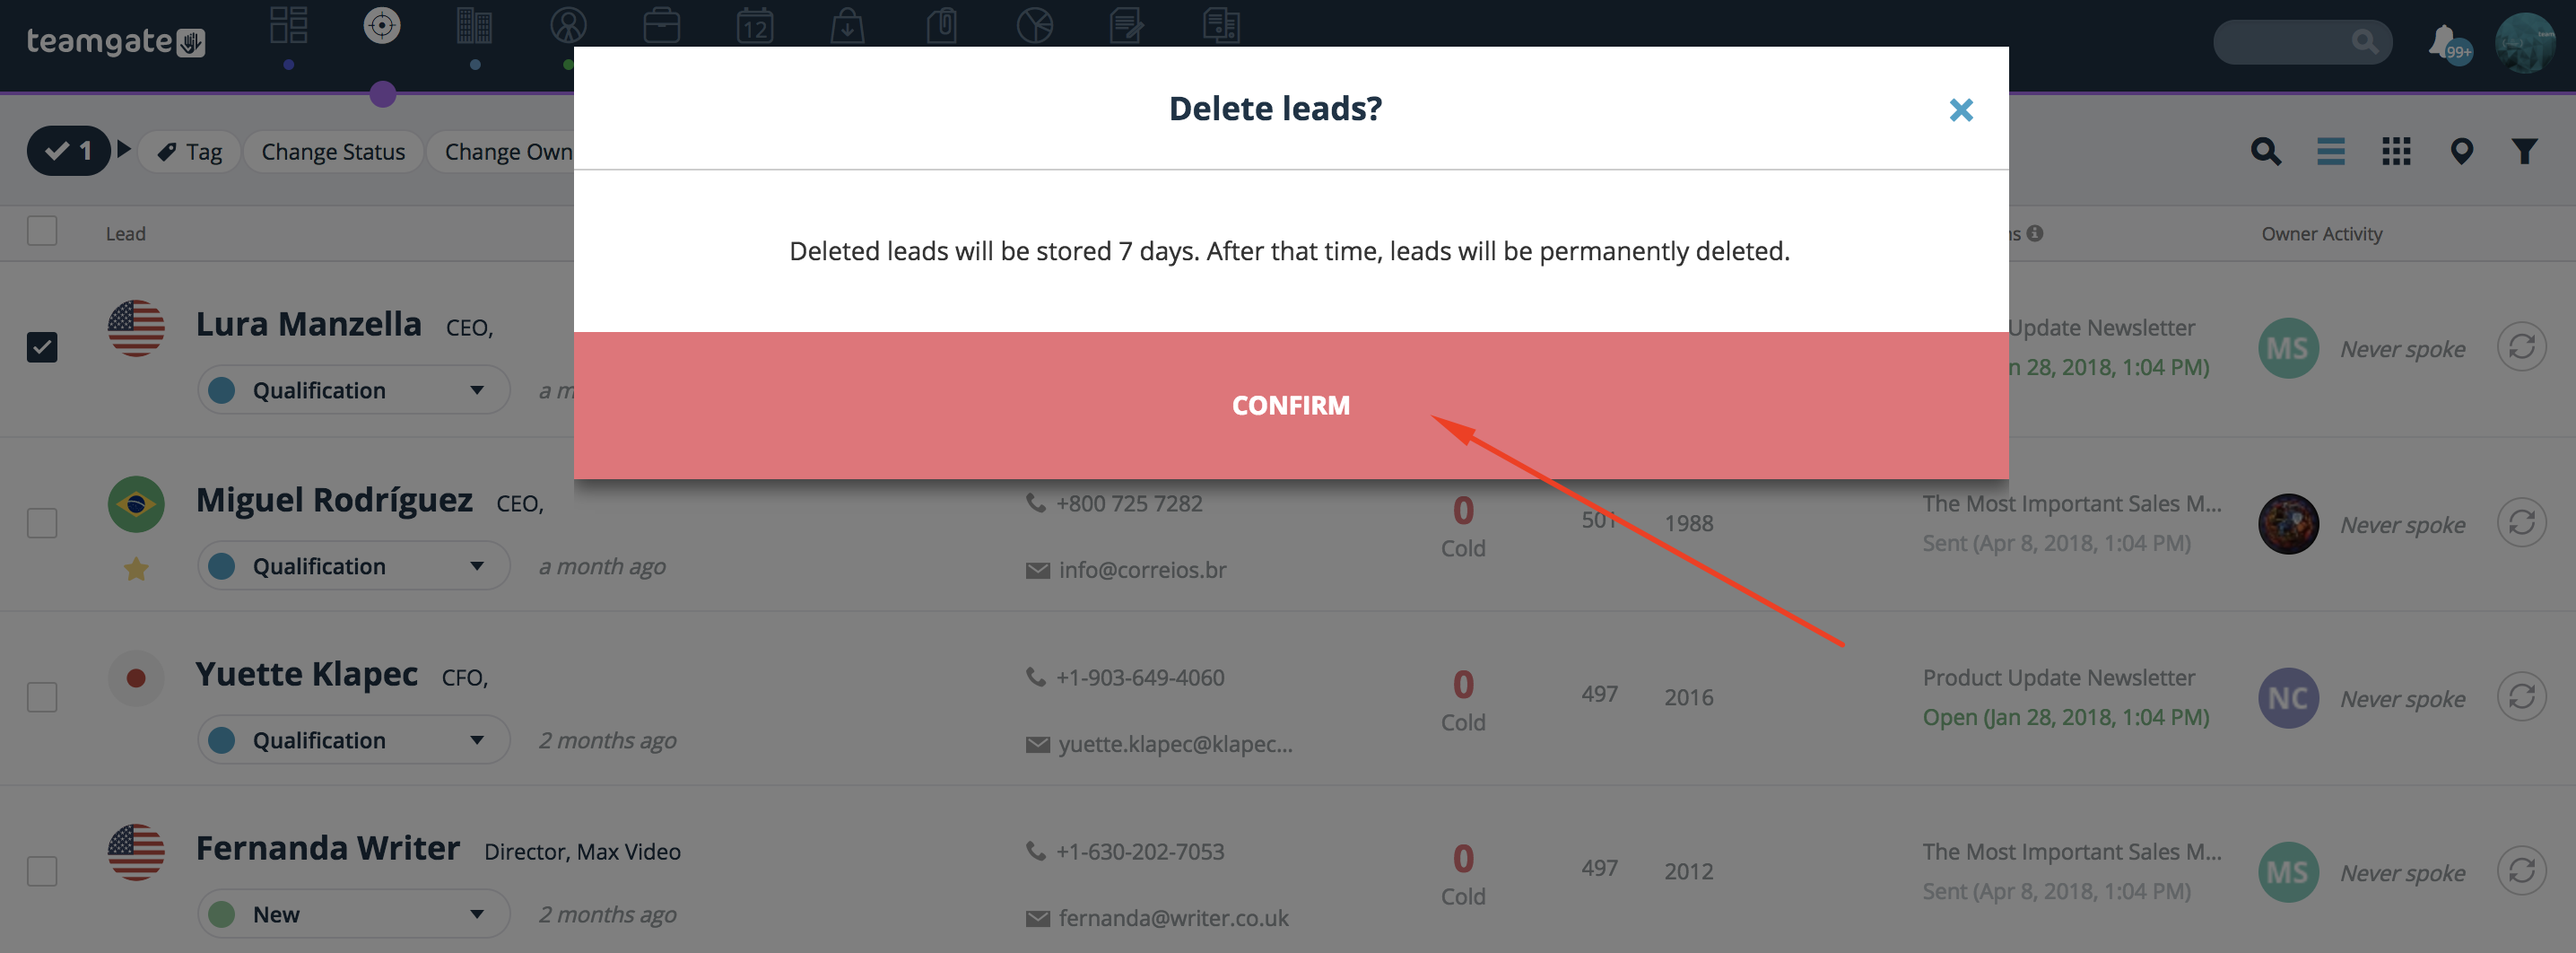 delete-leads-from-the-list-confirm-Teamgate.png